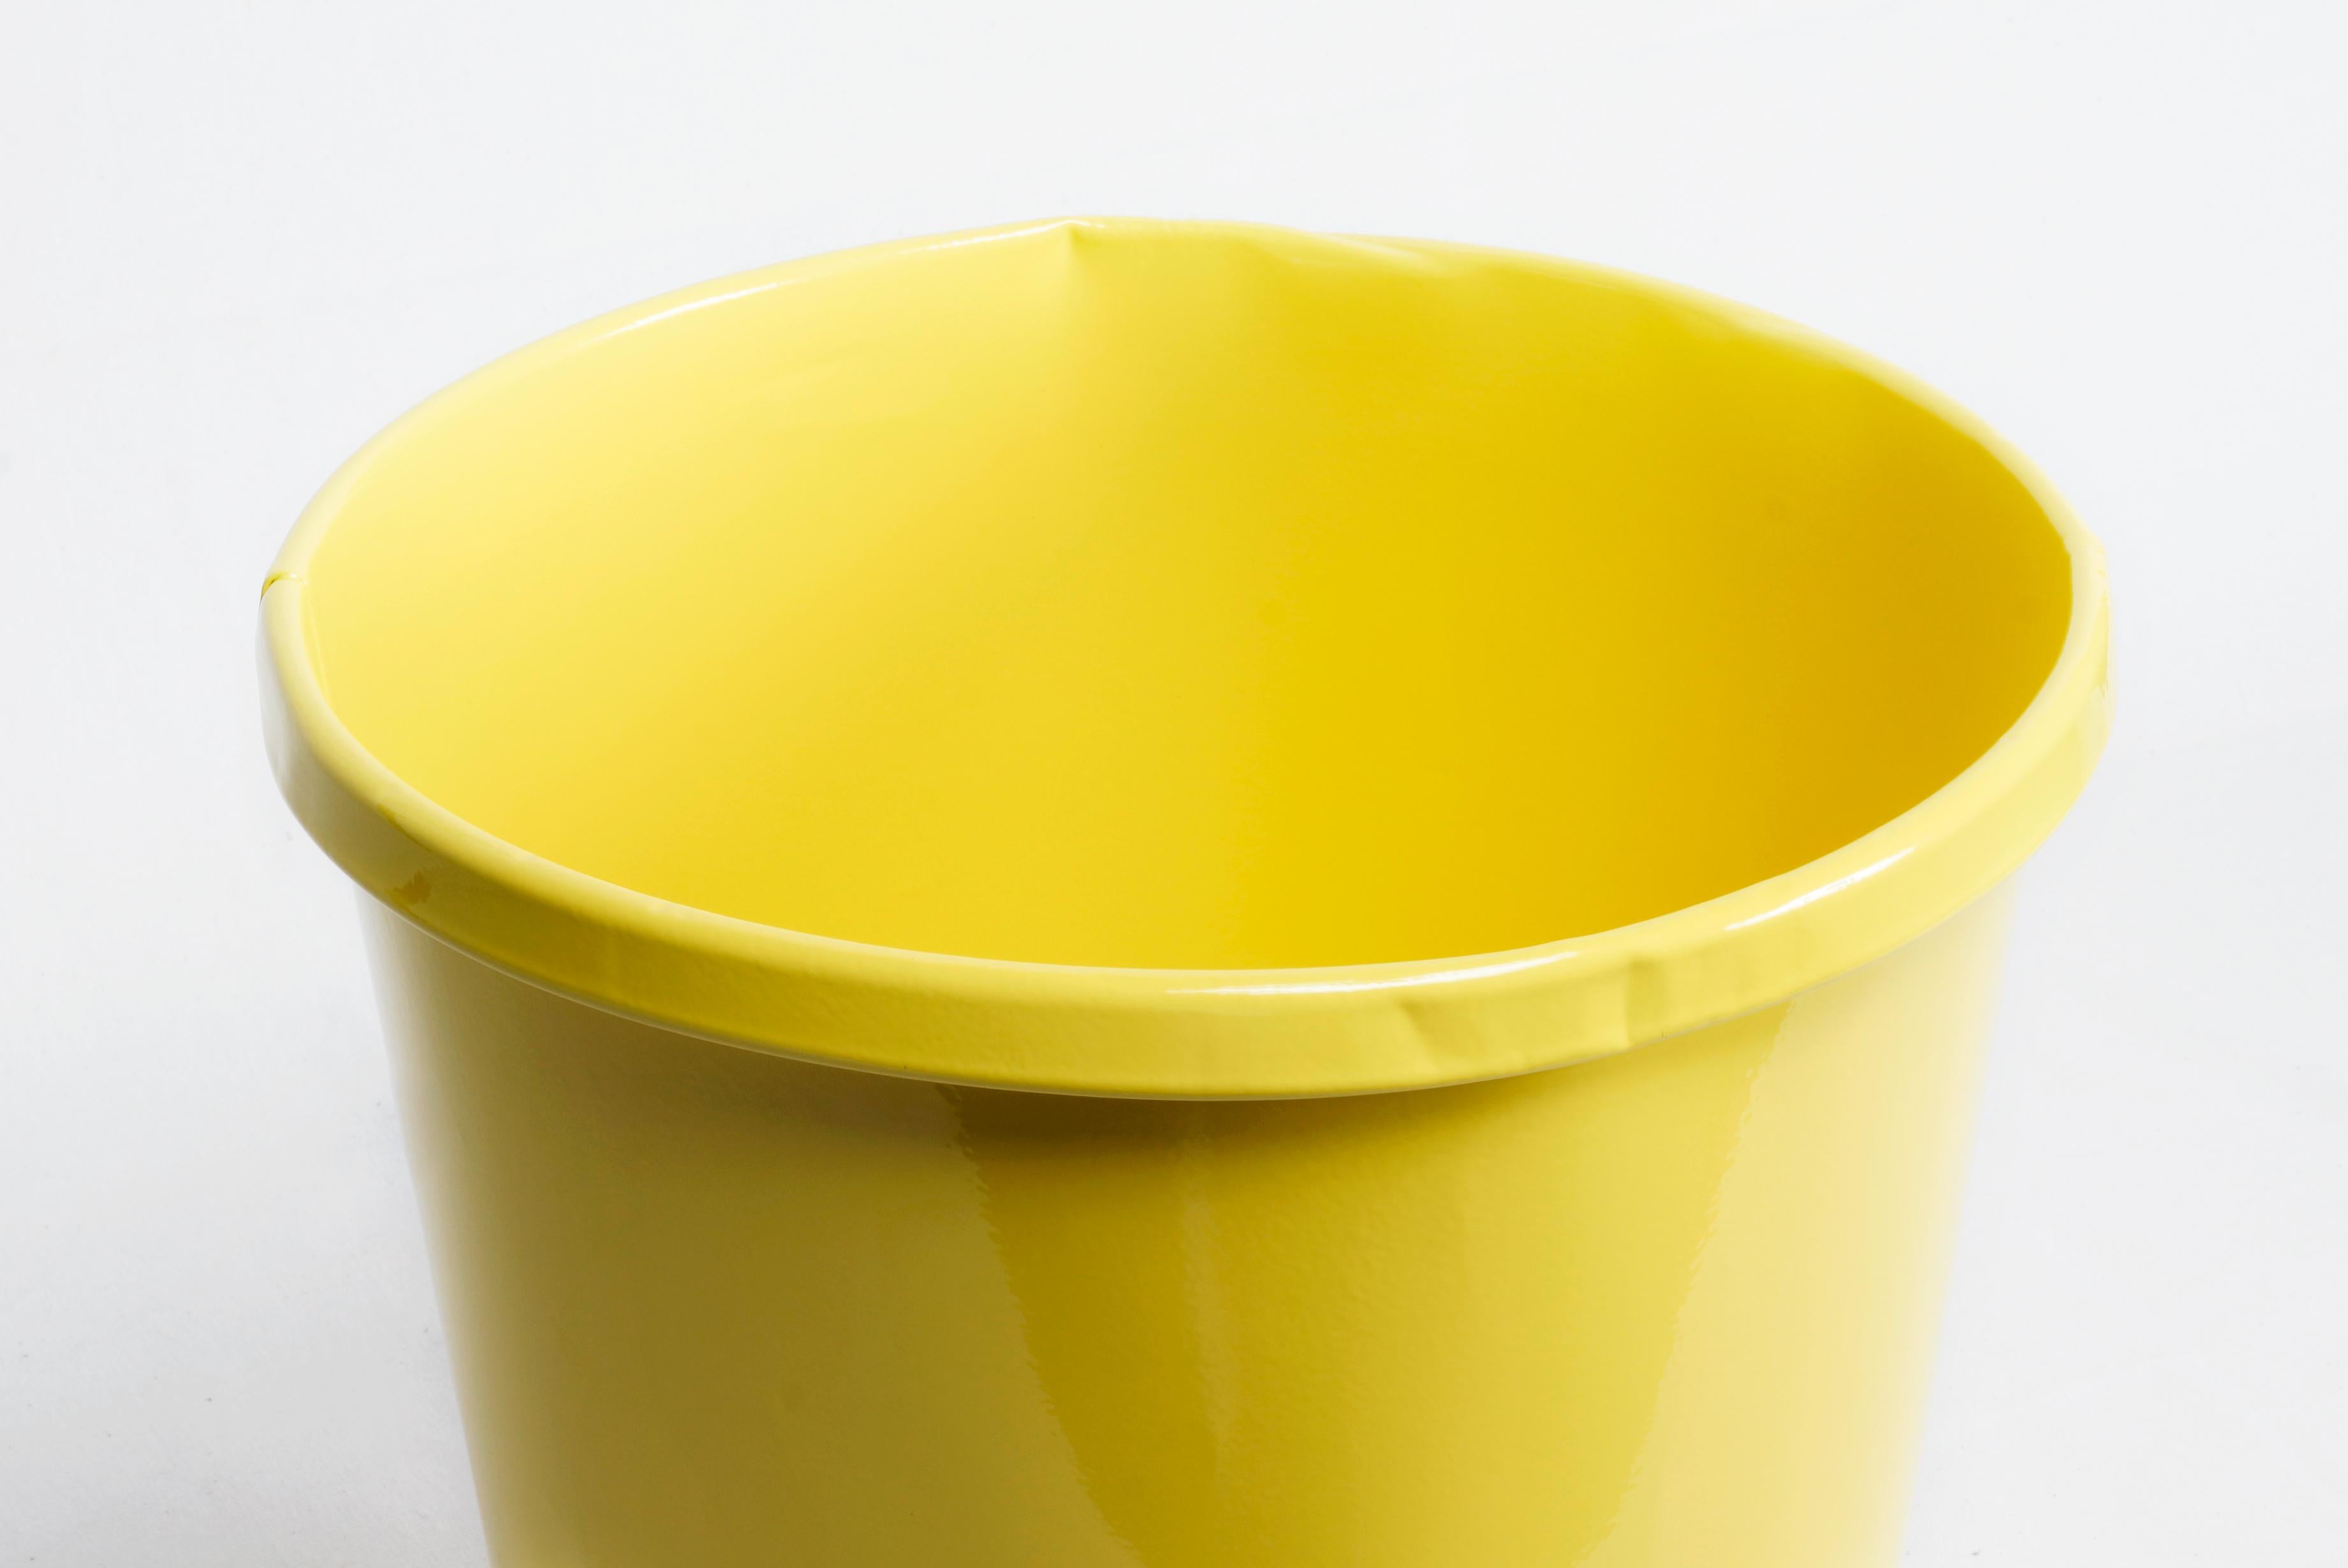 Powder-Coated 1940s Lit-Ning Products Steel Trash Can Refinished in Gloss Yellow